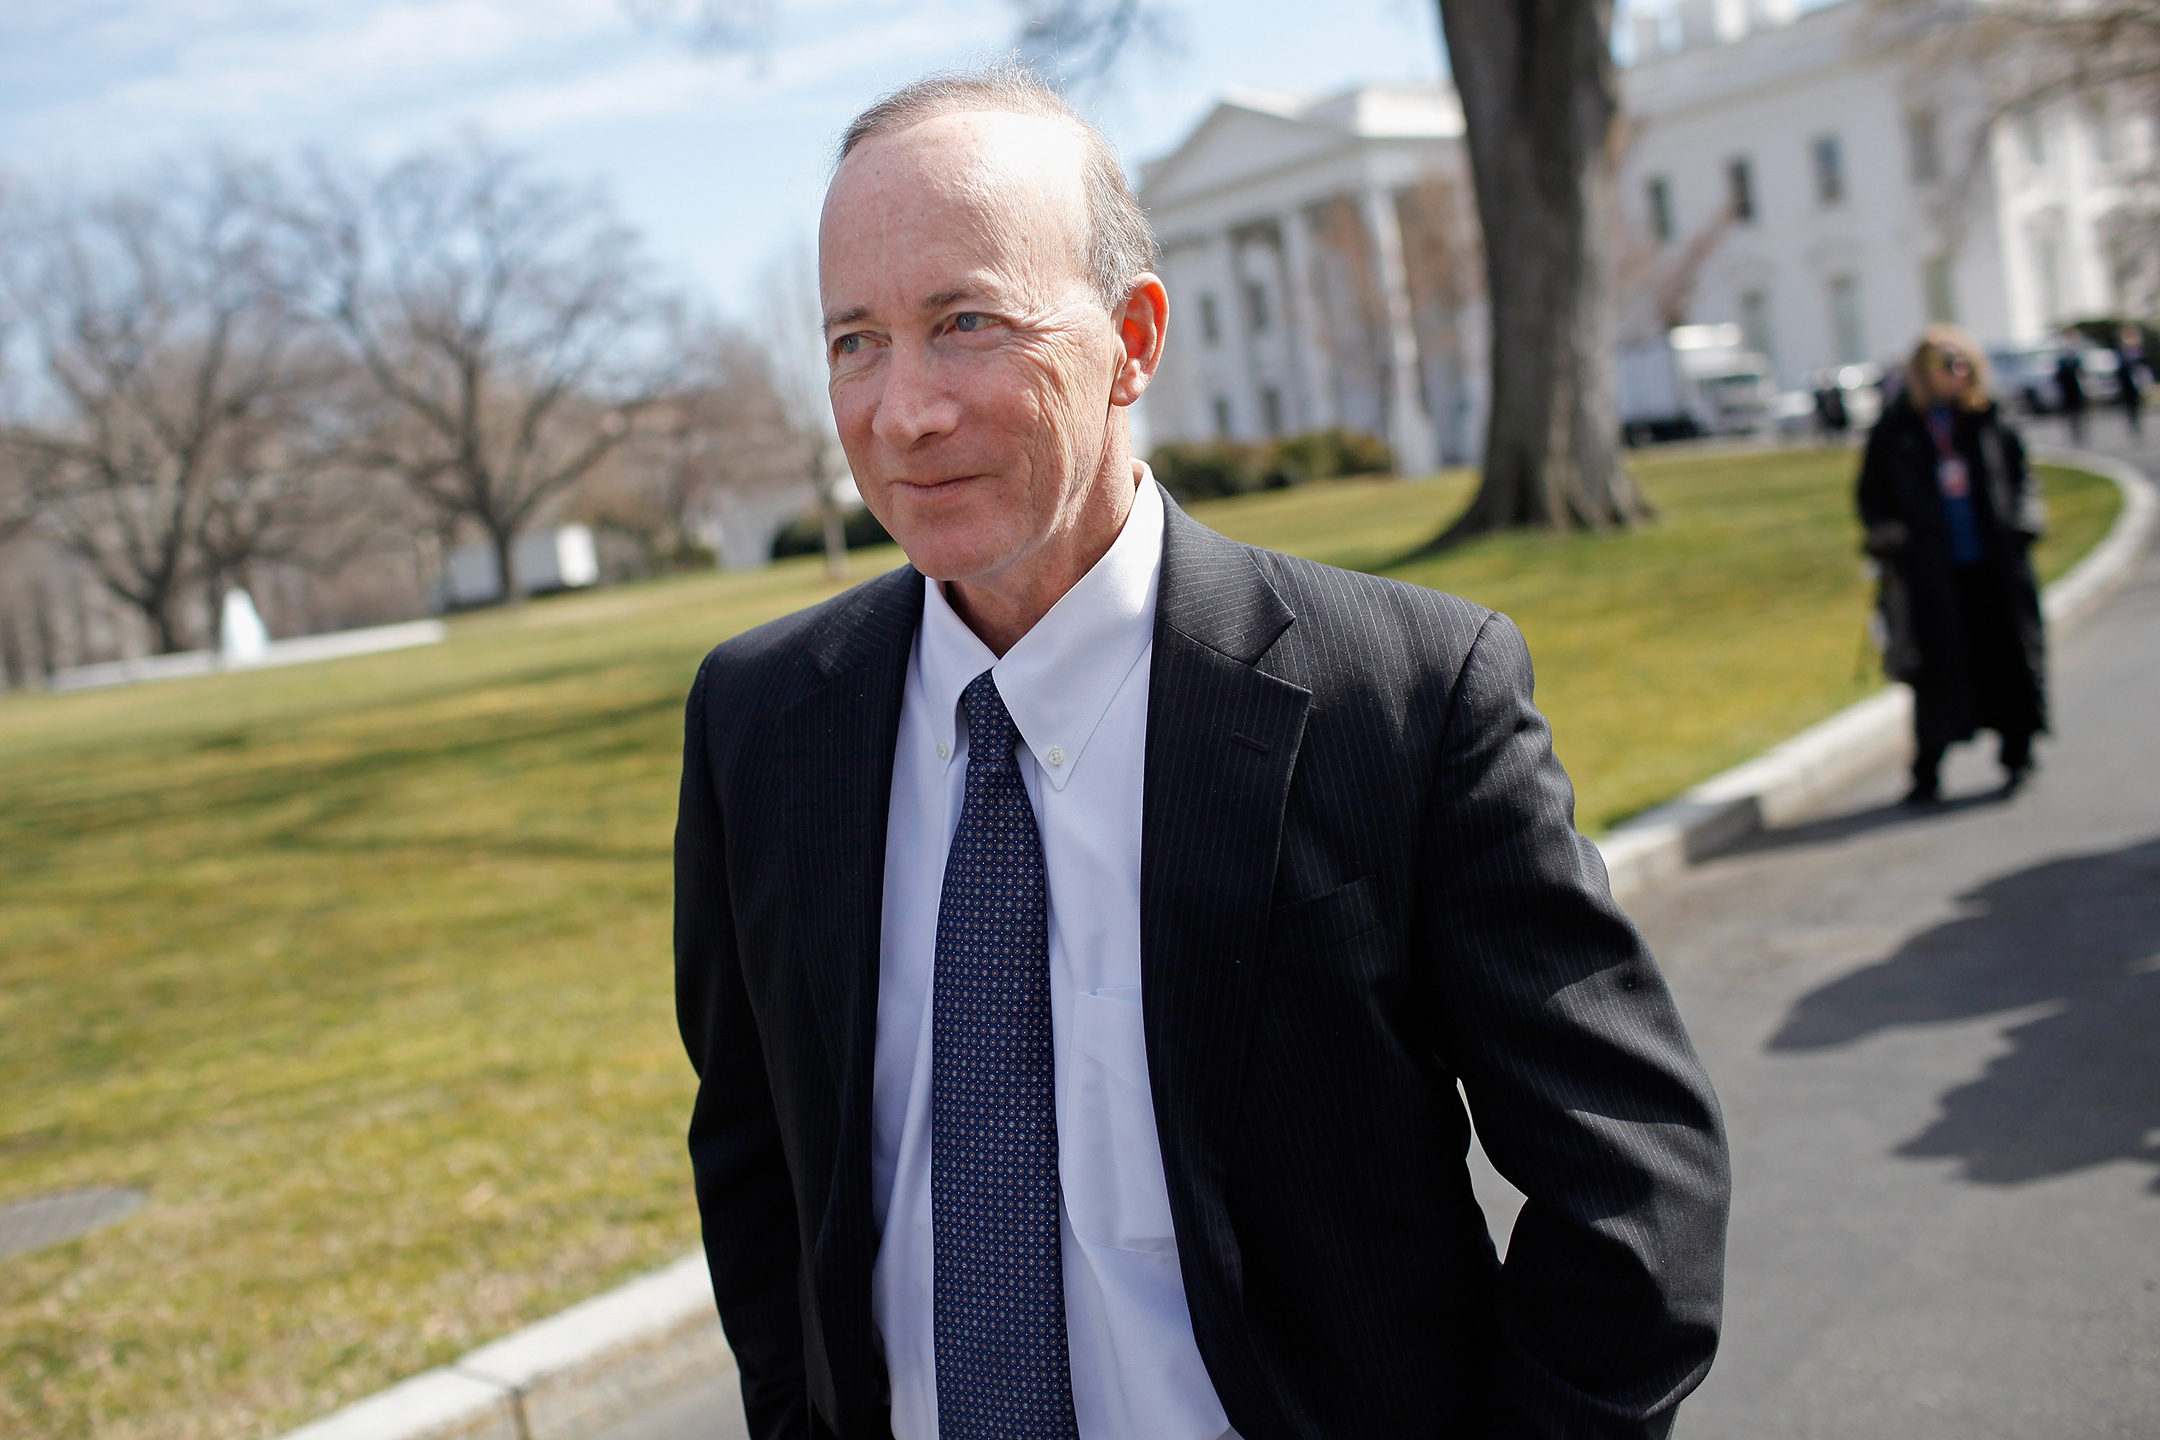 Mitch Daniels in a suit walking away from the White House